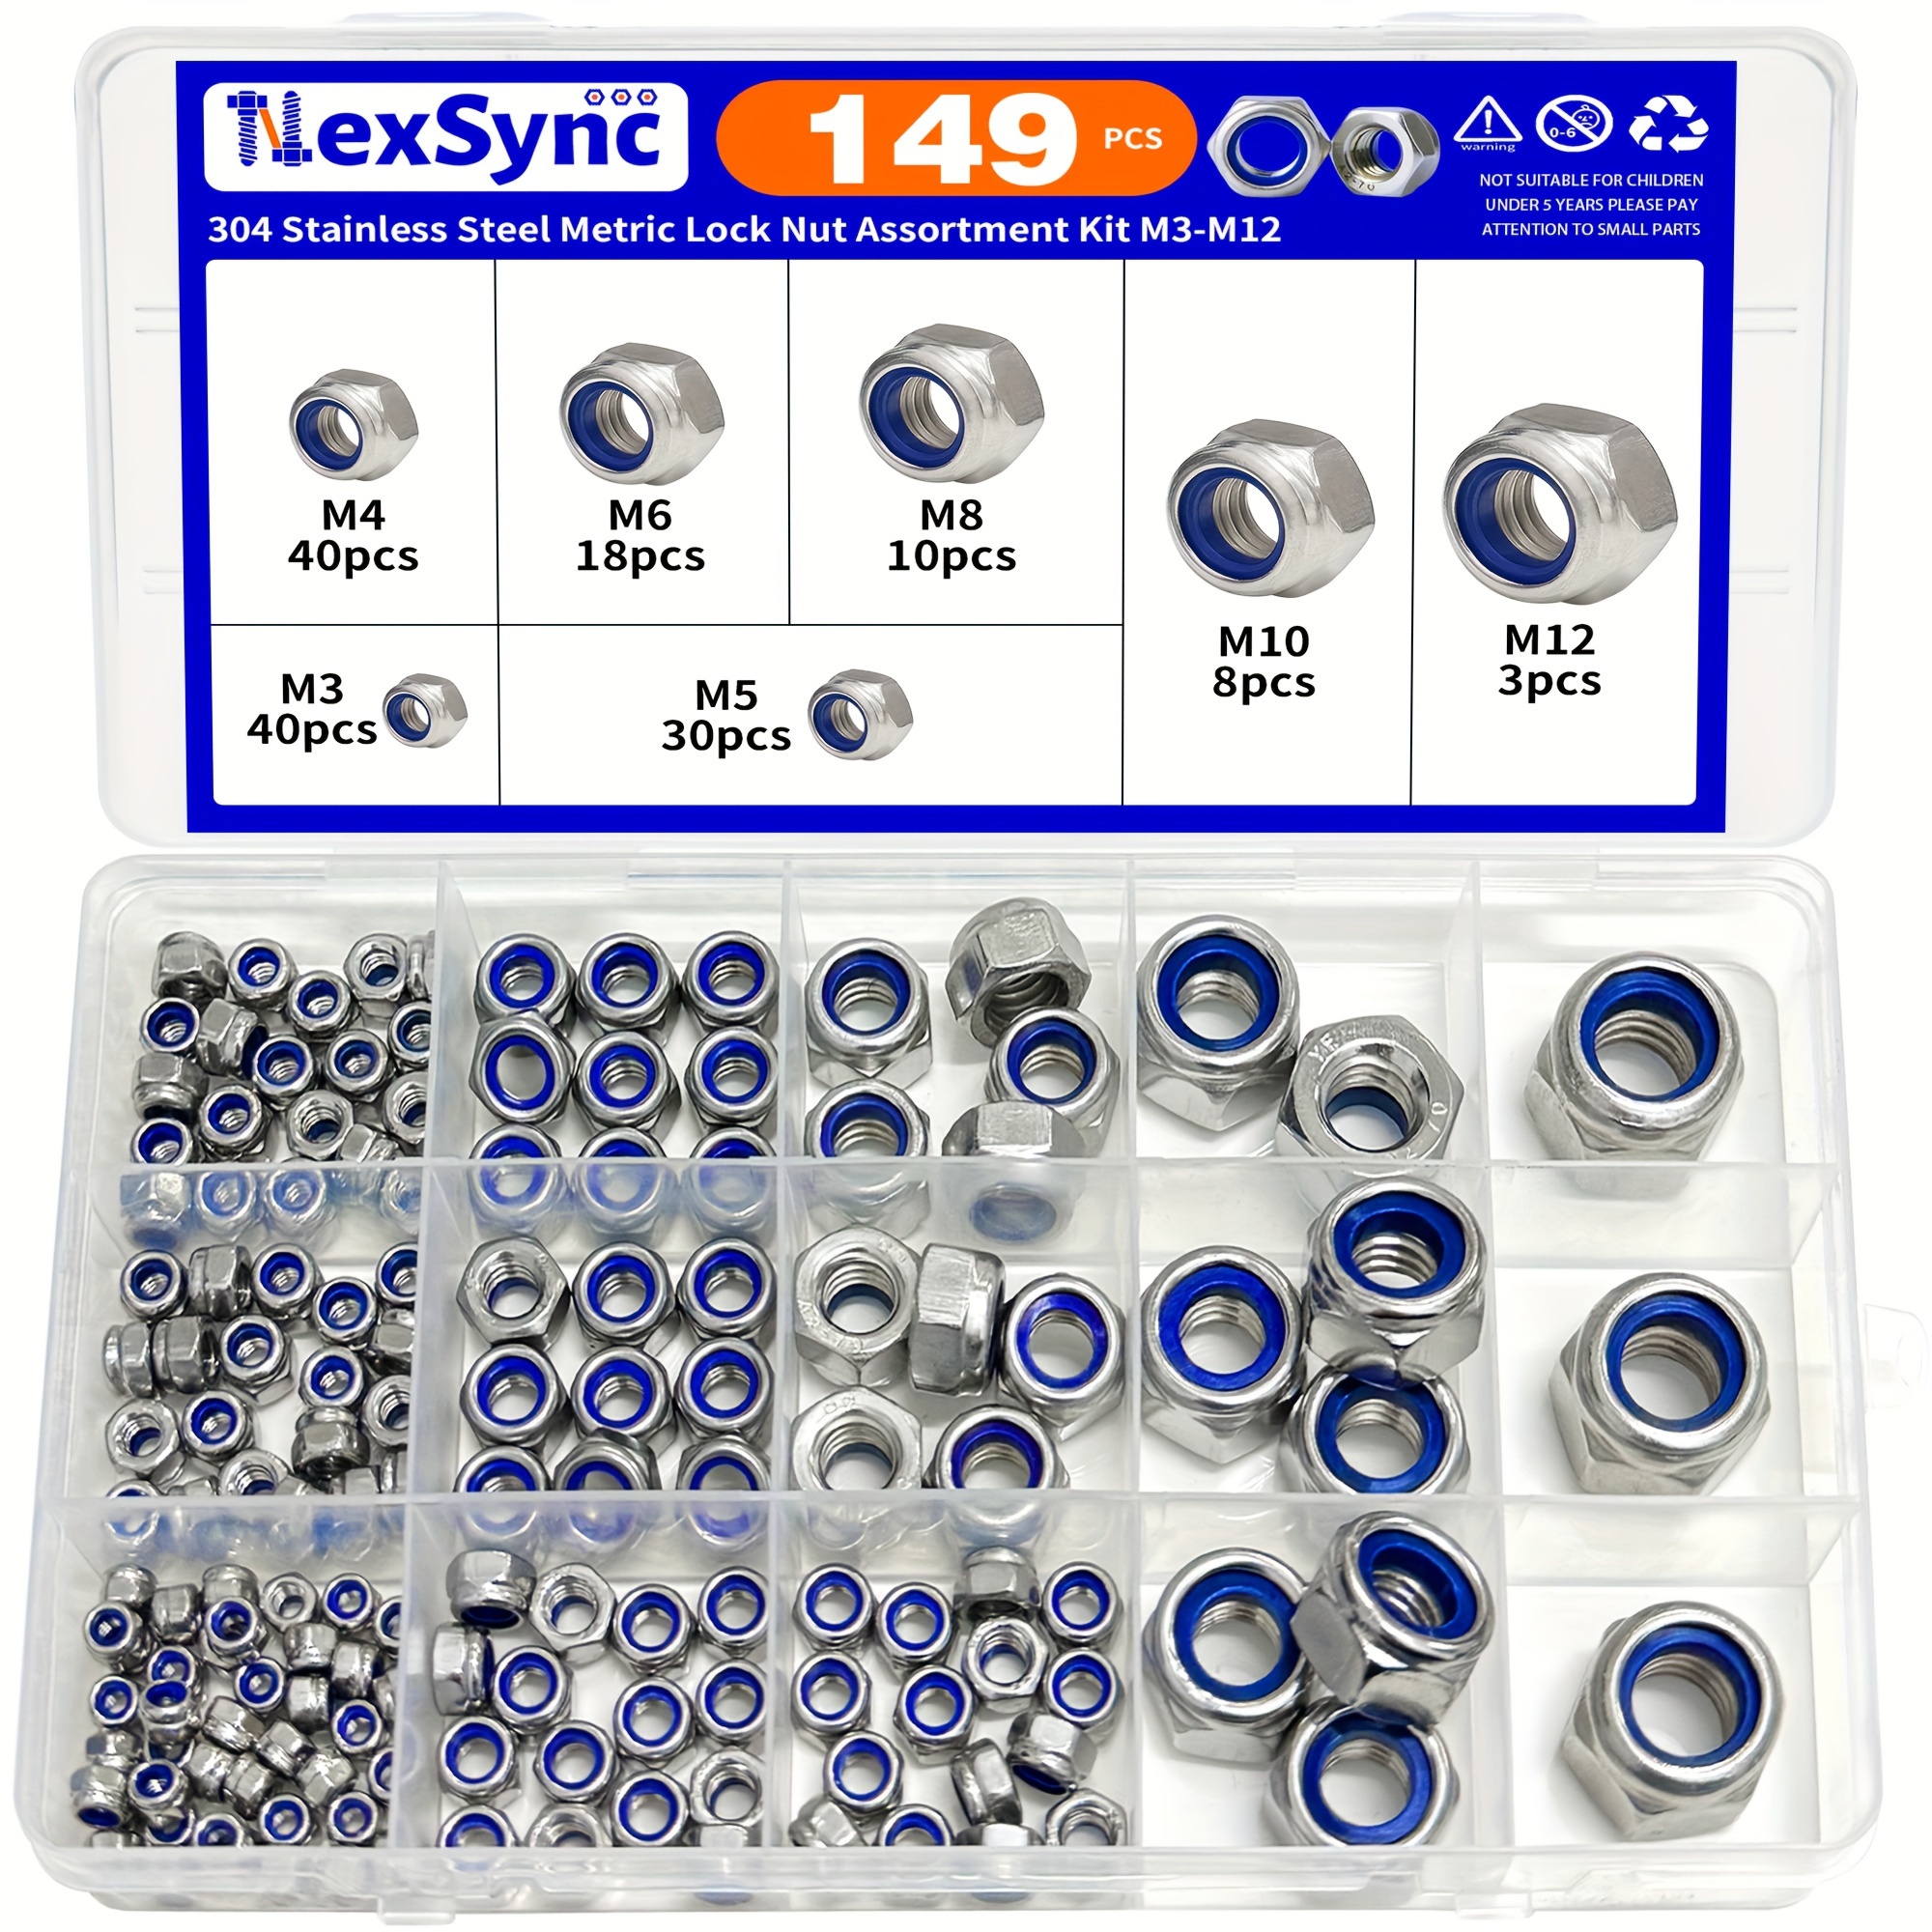 

149pcs Metric Nylon Insert Lock Nut Assortment Kit, M3-m12 Sizes, 304 Stainless Steel, Professional Grade Hex Lock Nuts For Bolts, Diy Projects & Machinery Maintenance